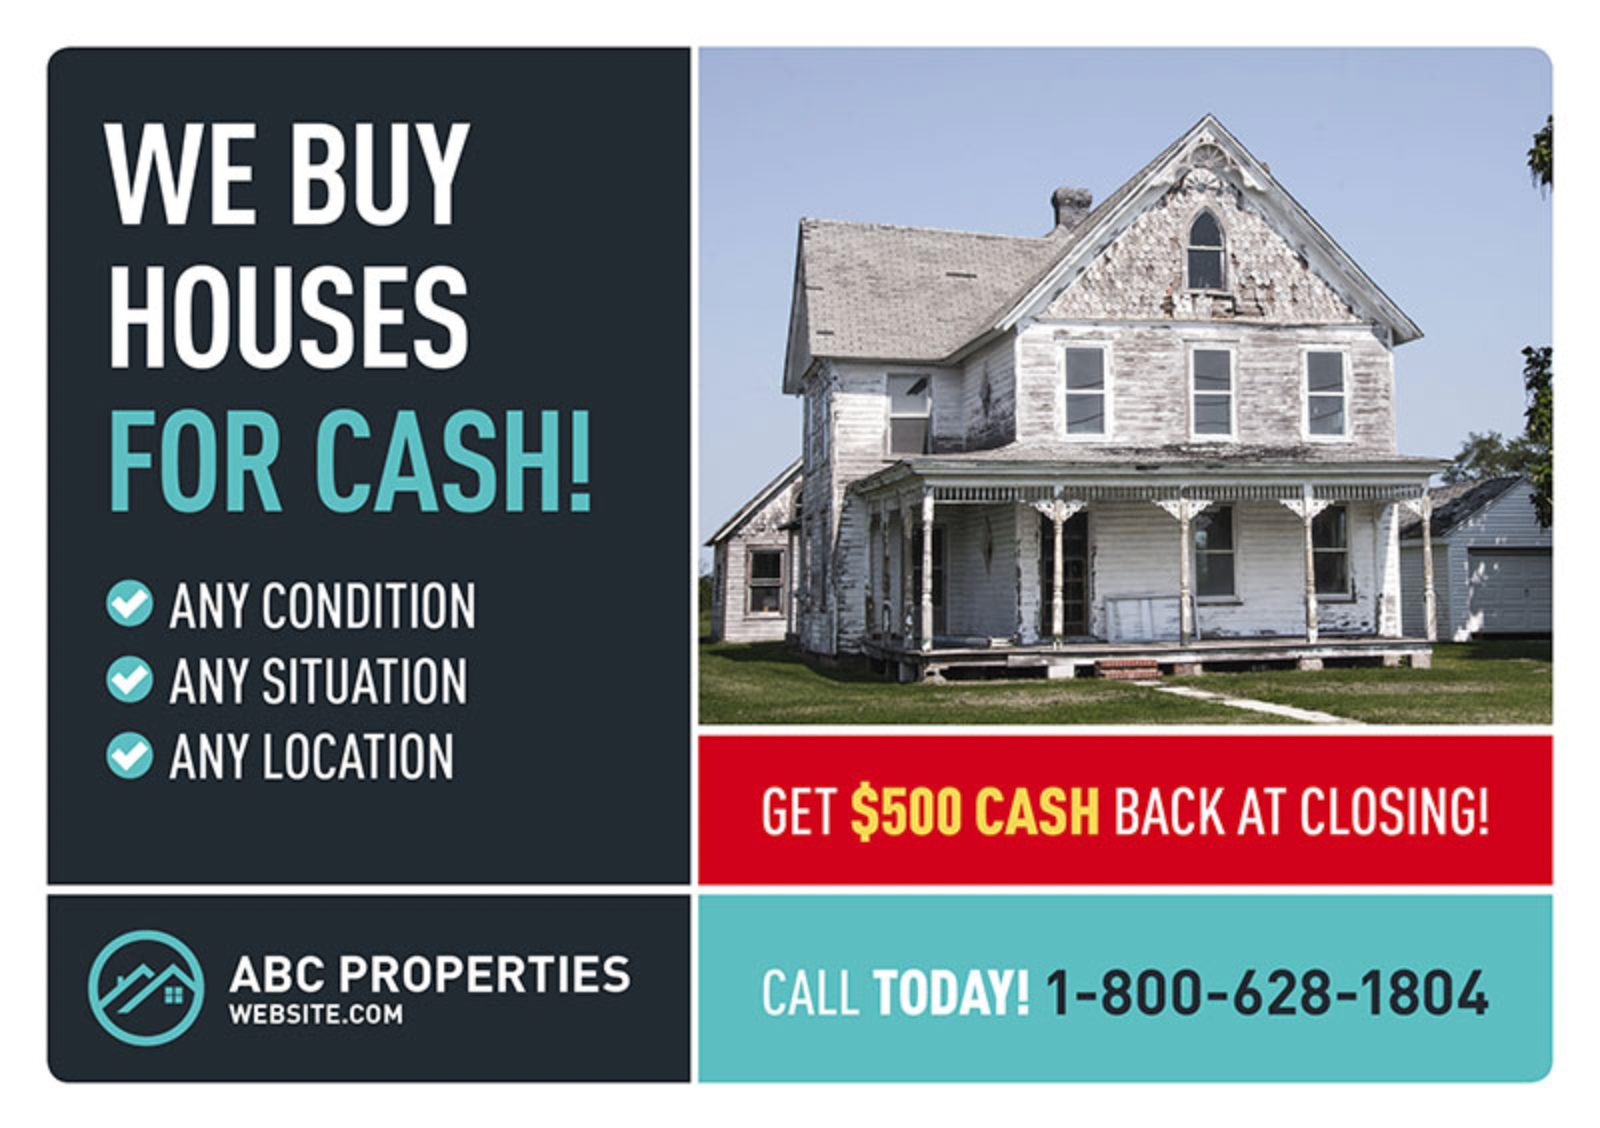 Cash Offer - Distressed home or bankruptcy